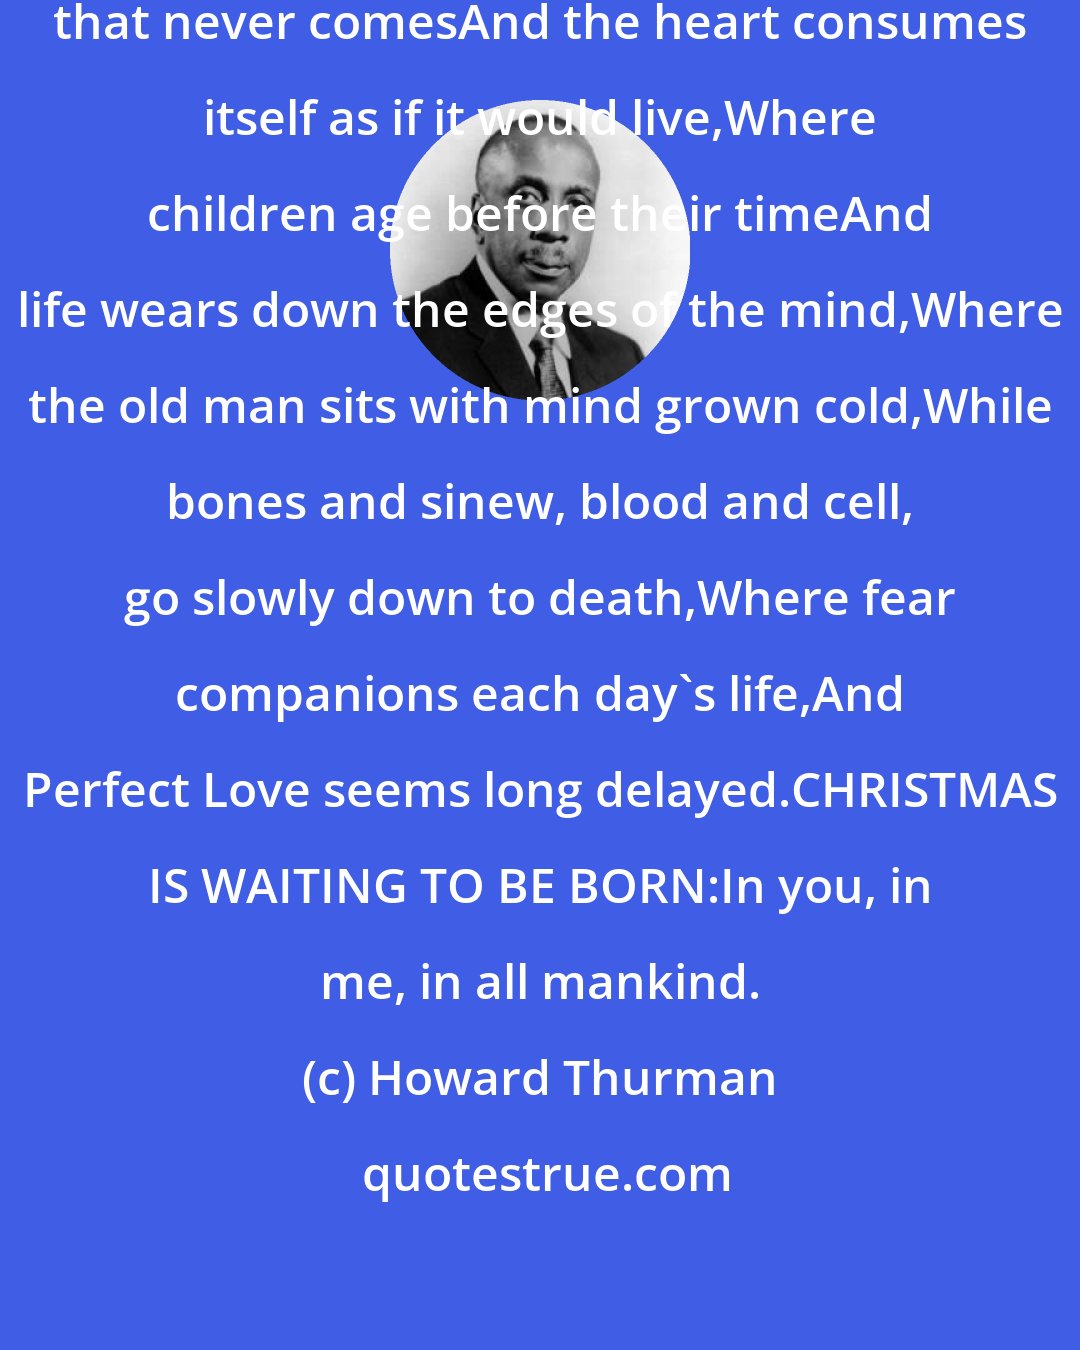 Howard Thurman: Where refugees seek deliverance that never comesAnd the heart consumes itself as if it would live,Where children age before their timeAnd life wears down the edges of the mind,Where the old man sits with mind grown cold,While bones and sinew, blood and cell, go slowly down to death,Where fear companions each day's life,And Perfect Love seems long delayed.CHRISTMAS IS WAITING TO BE BORN:In you, in me, in all mankind.